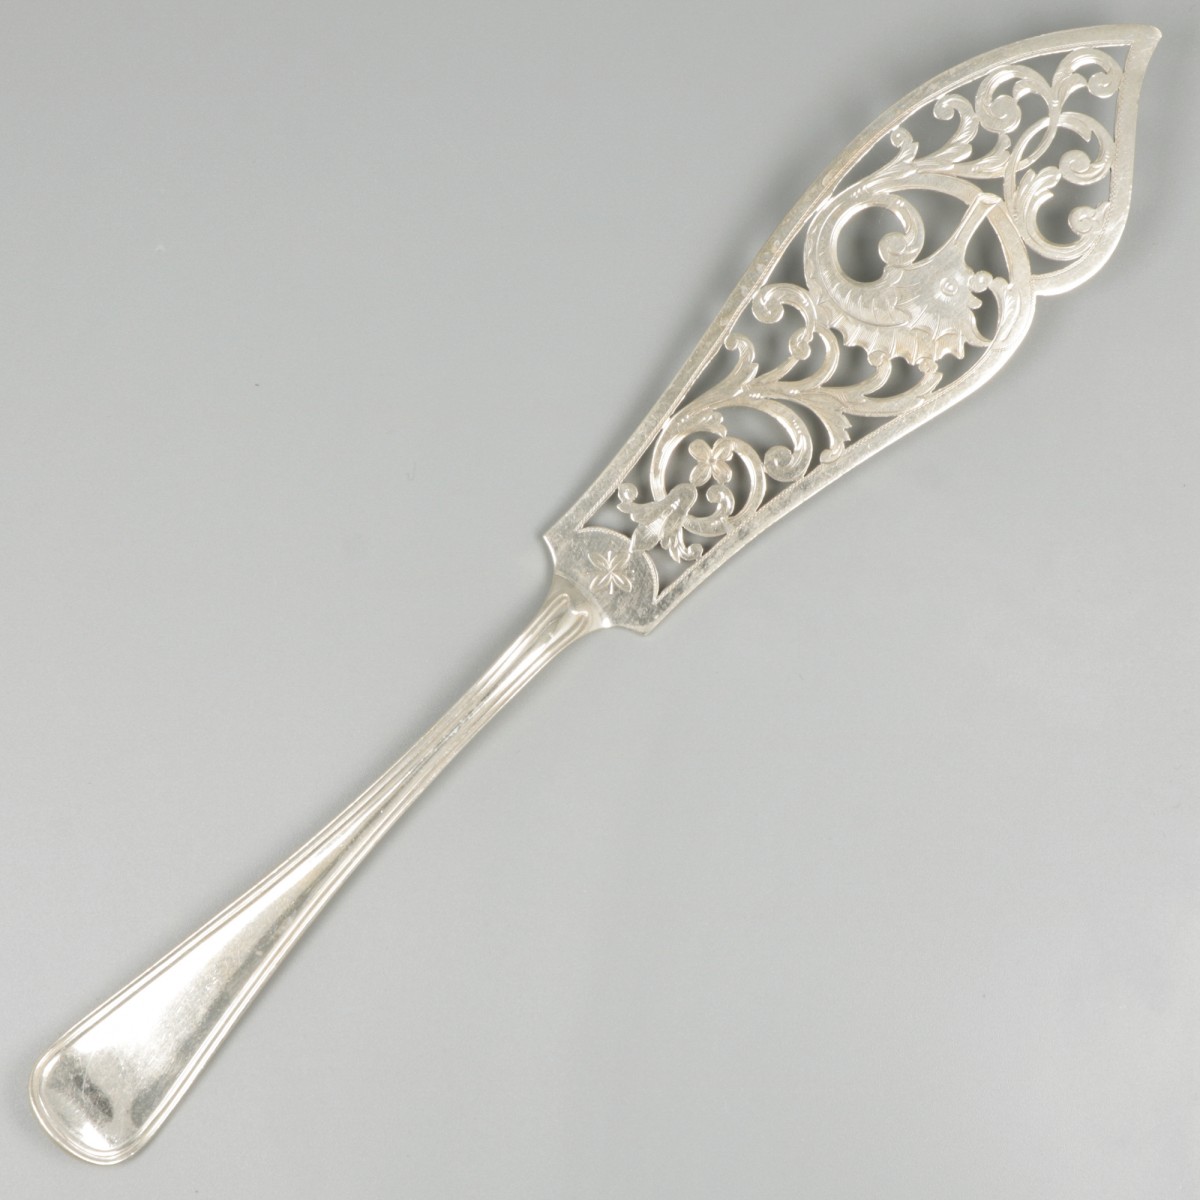 2-piece fish serving set silver. - Image 4 of 9